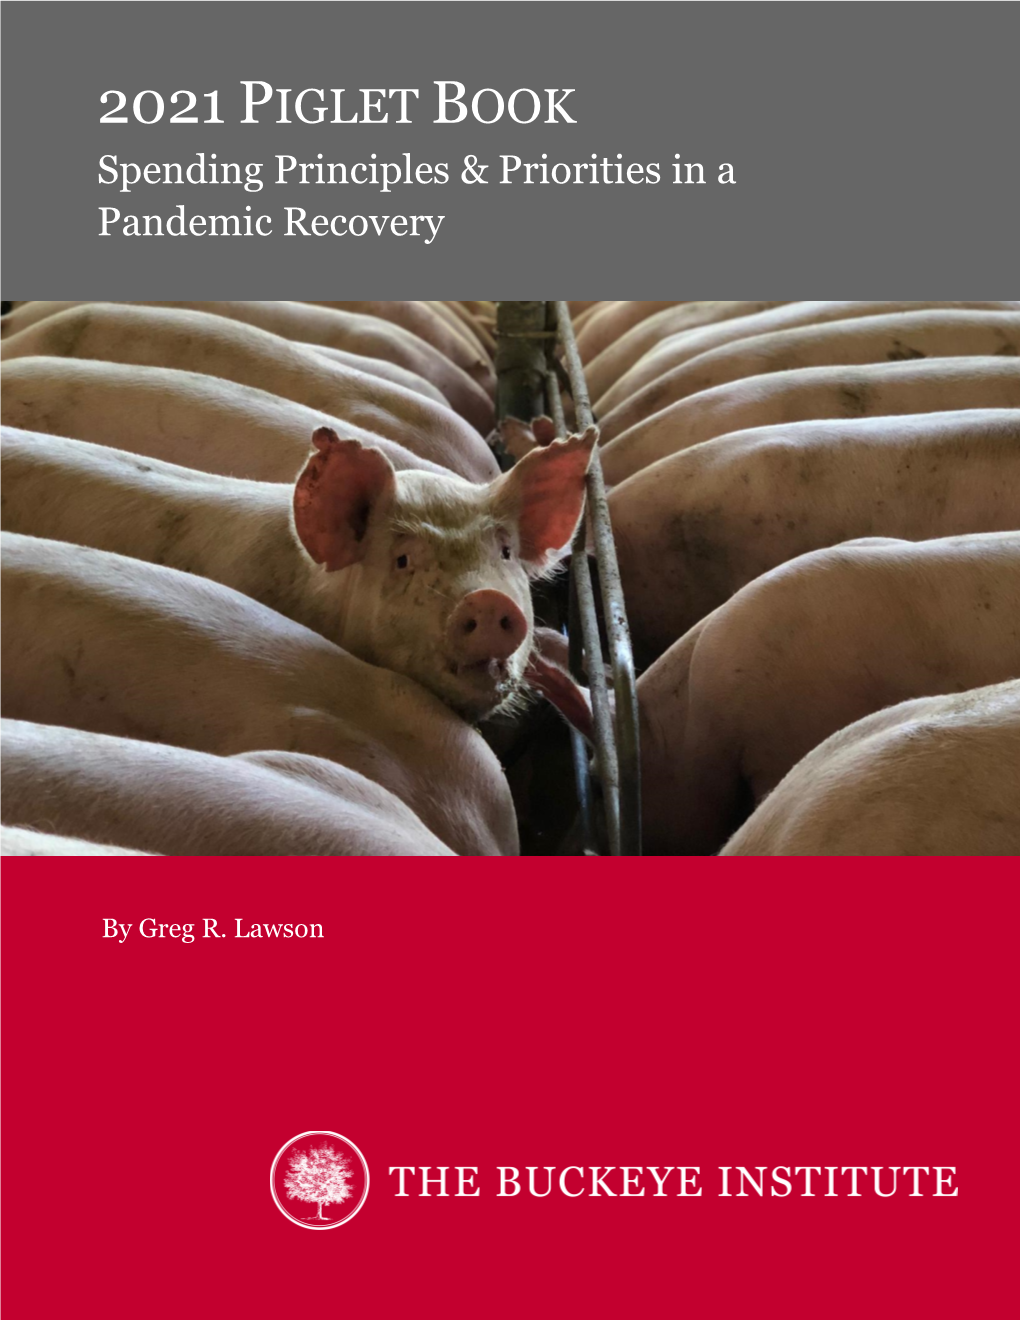 2021 PIGLET BOOK Spending Principles & Priorities in a Pandemic Recovery